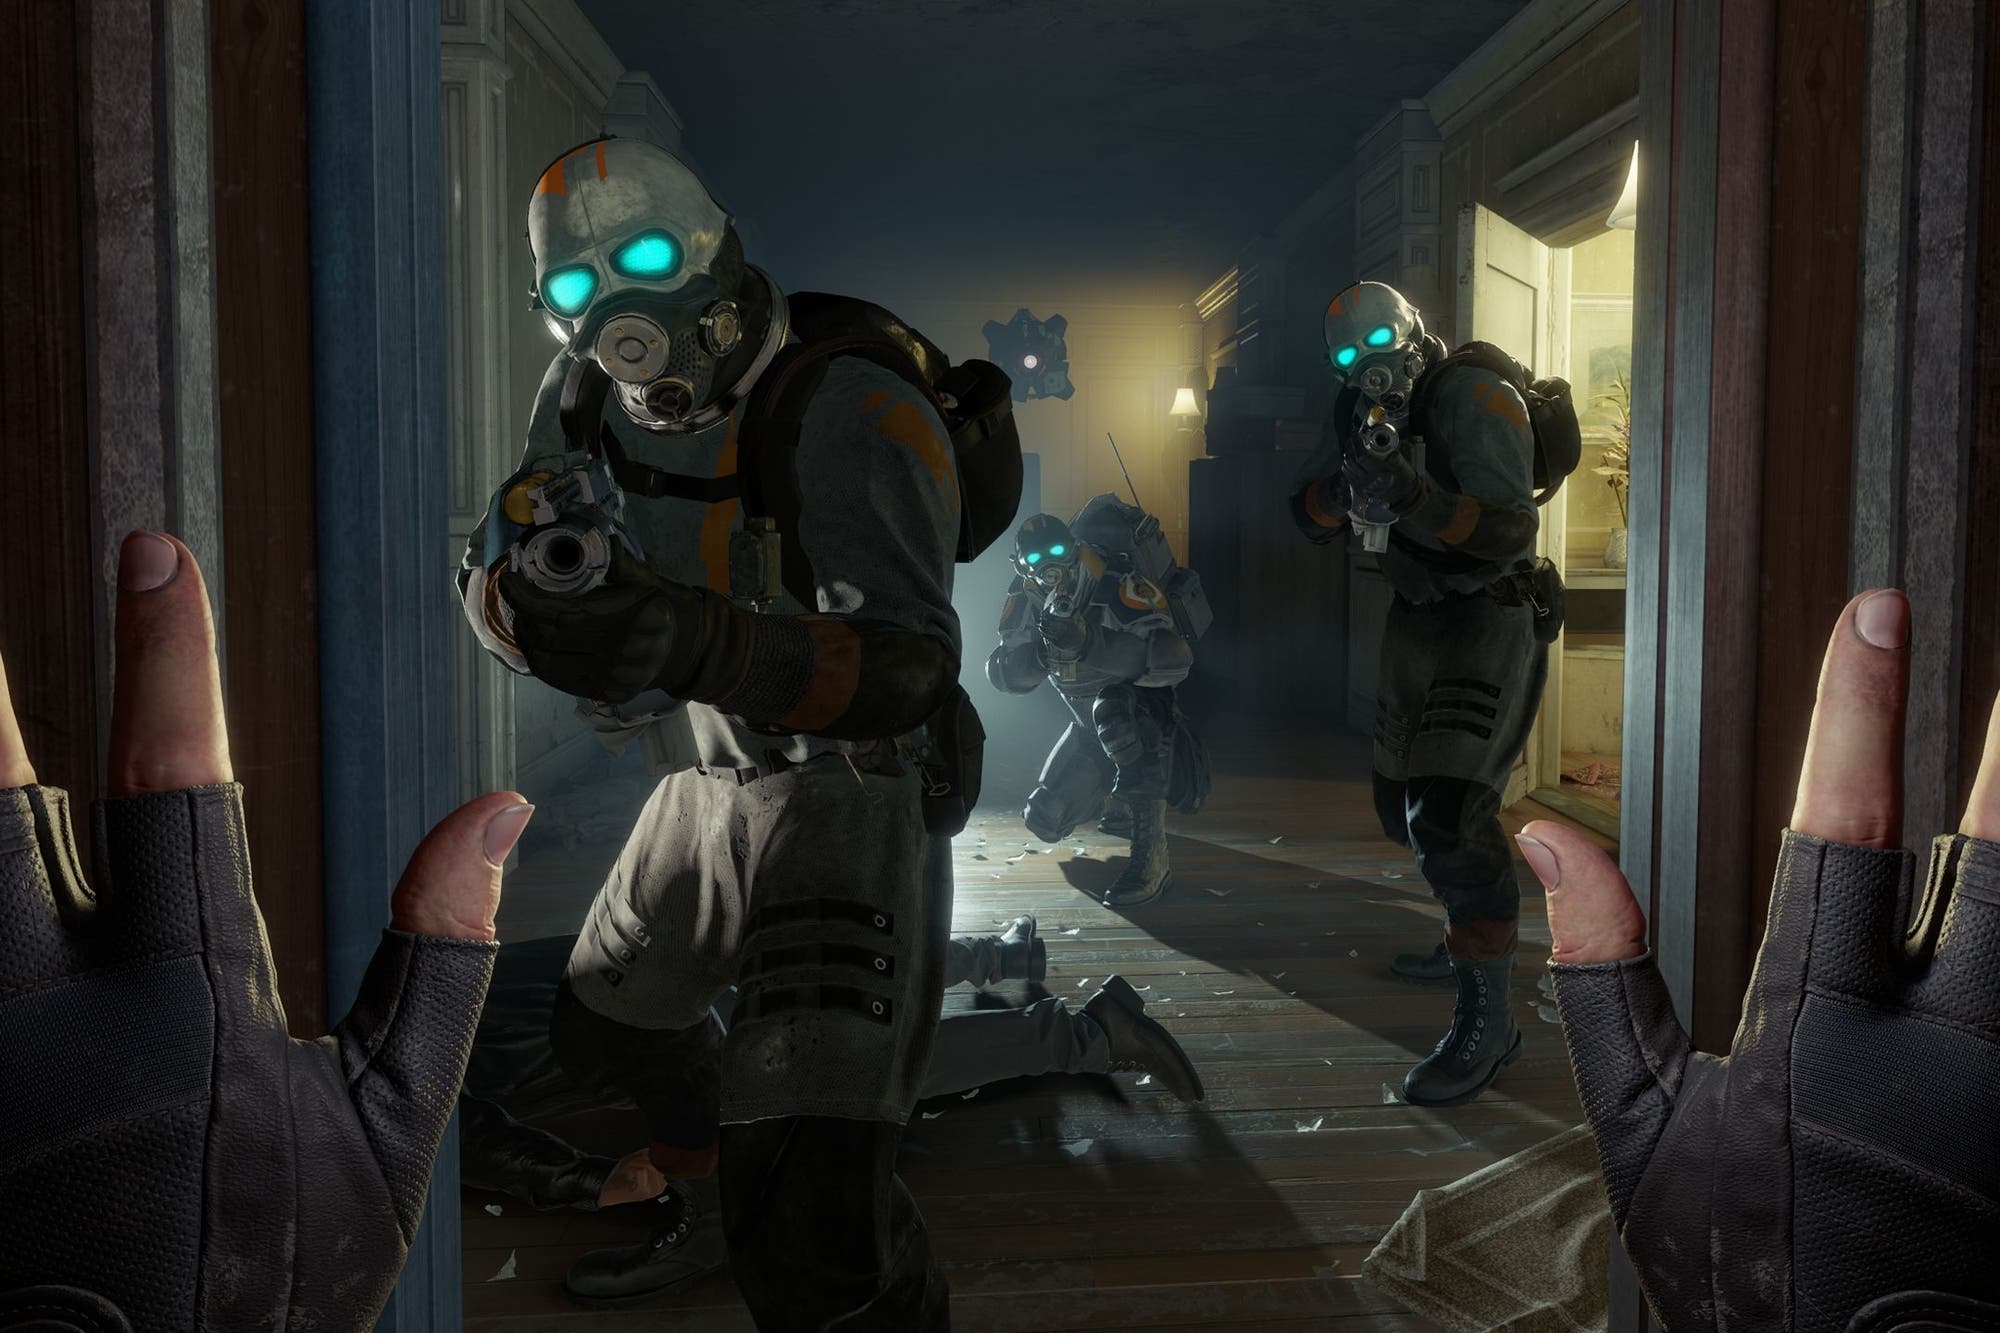 As being Half-Life: Alyx, Valve's video game for virtual reality helmets